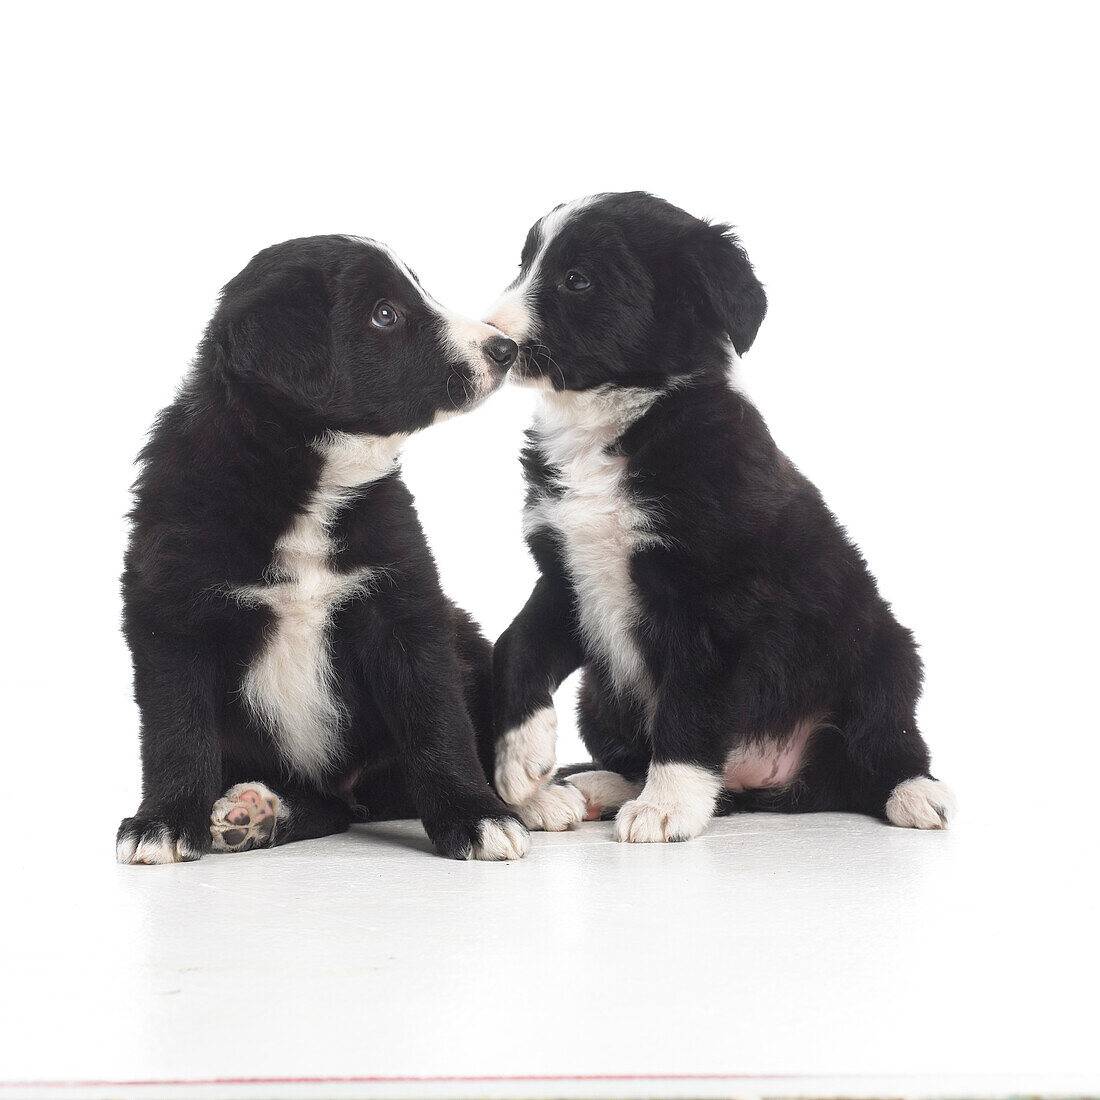 Two black and white sheepdog puppies, 7-week-old